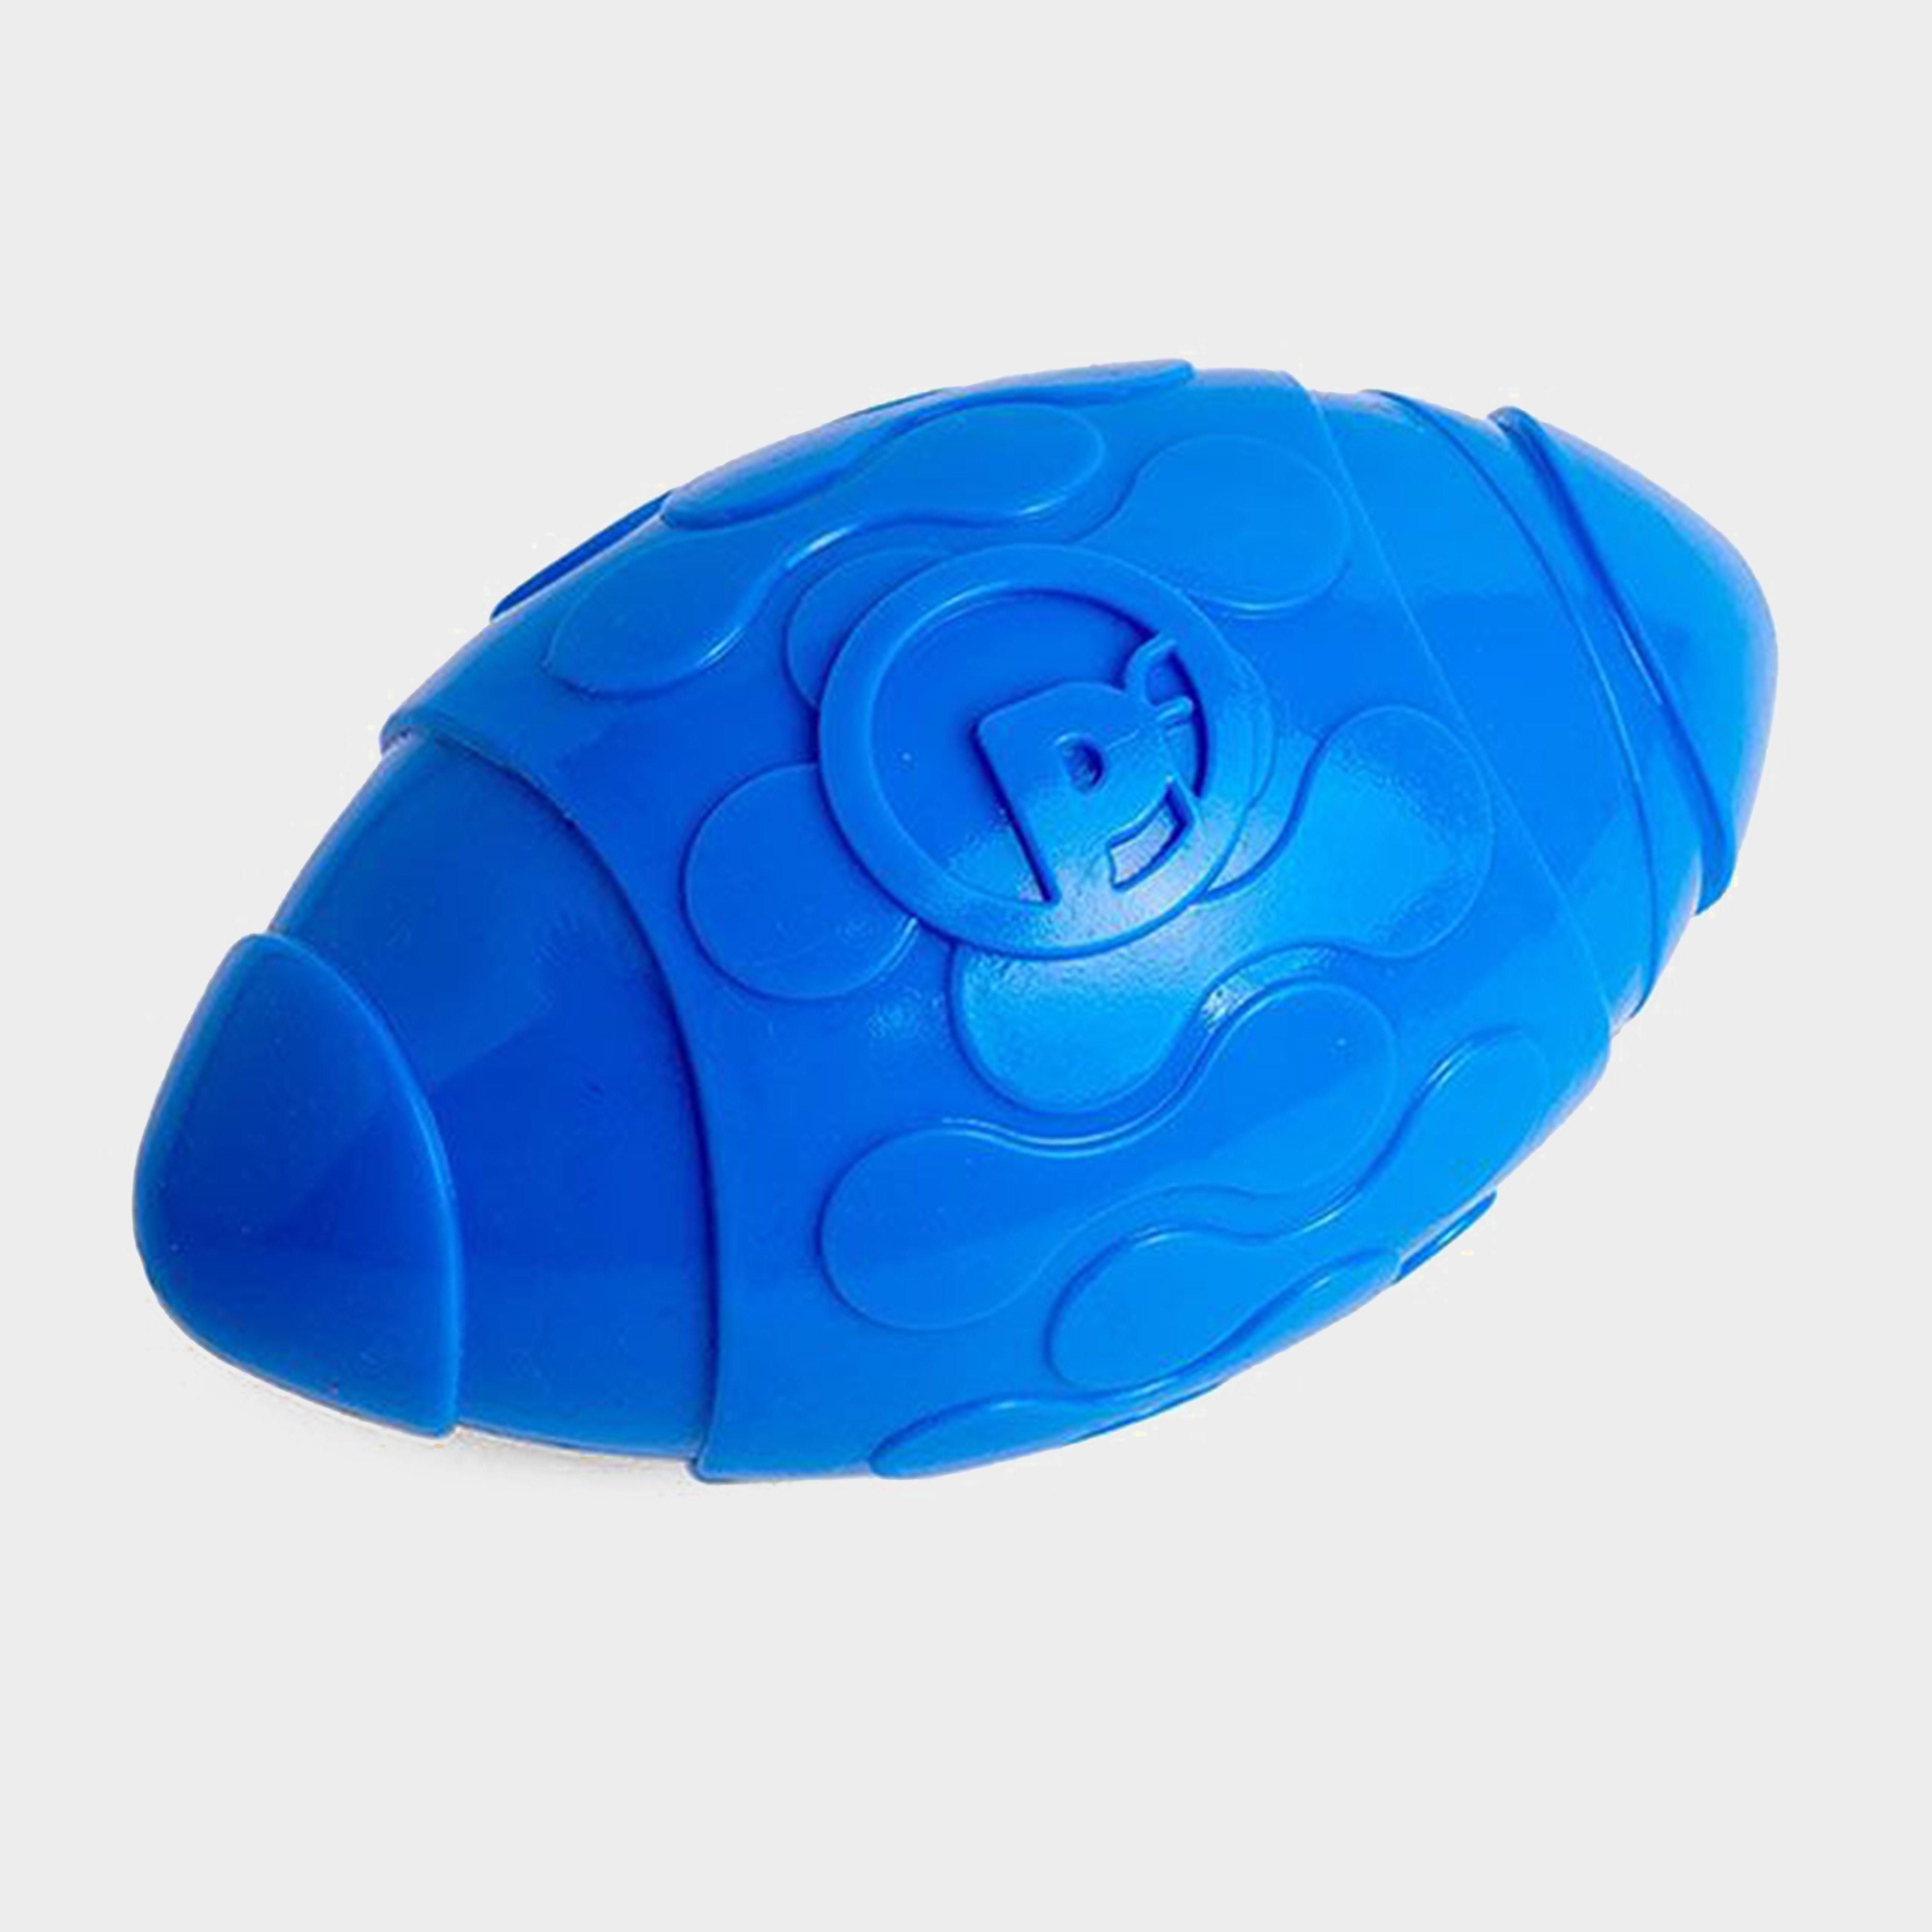 Petface Toyz Rugby Ball  Blue